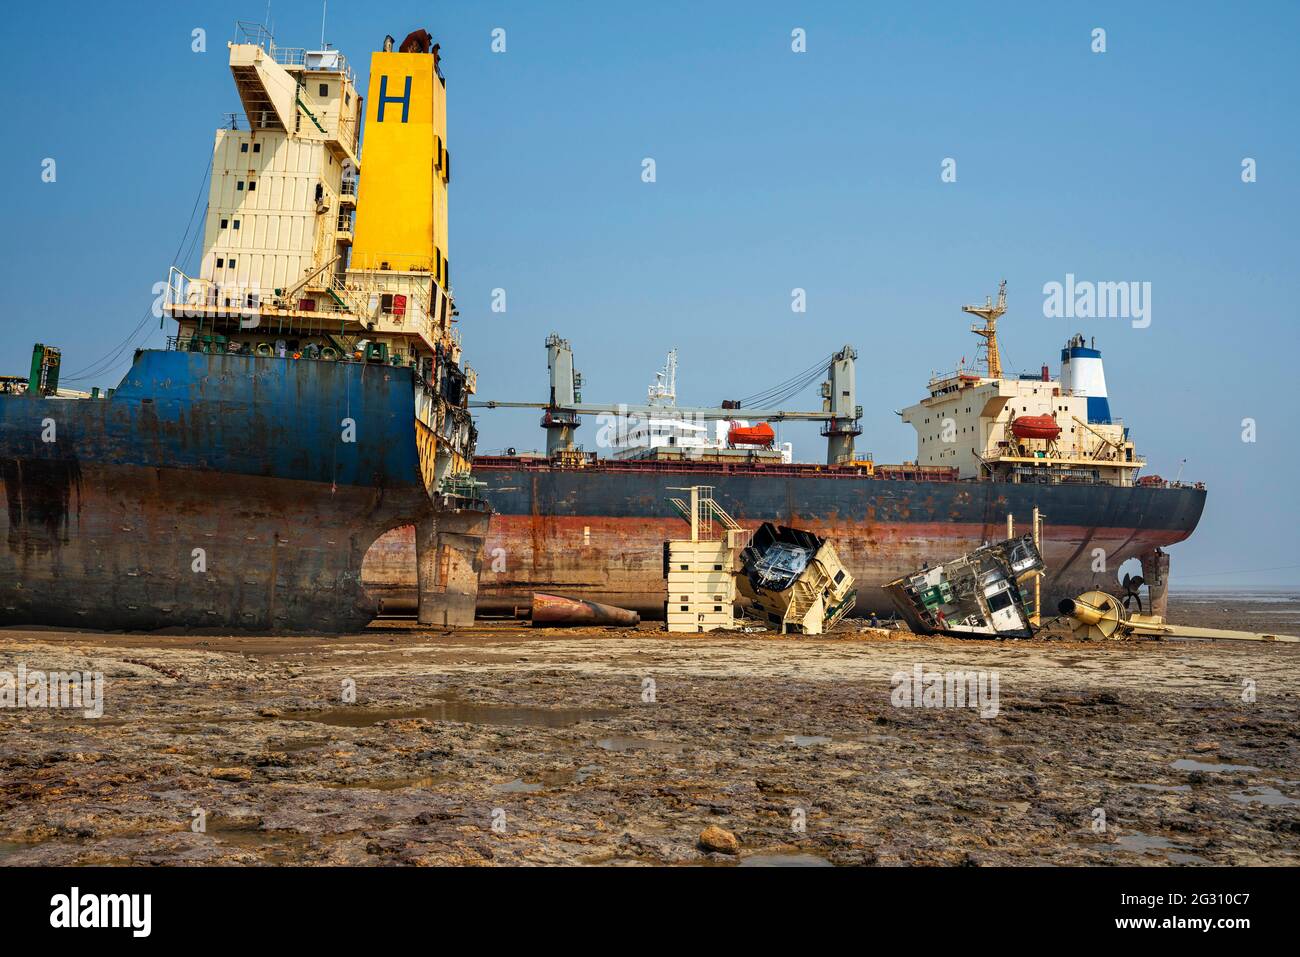 Alang ,01, February, 2016: Wide angle view of ship breaking yard with half cut ship and parts lying on ground,Bhavnagar,Gujarat,India Stock Photo